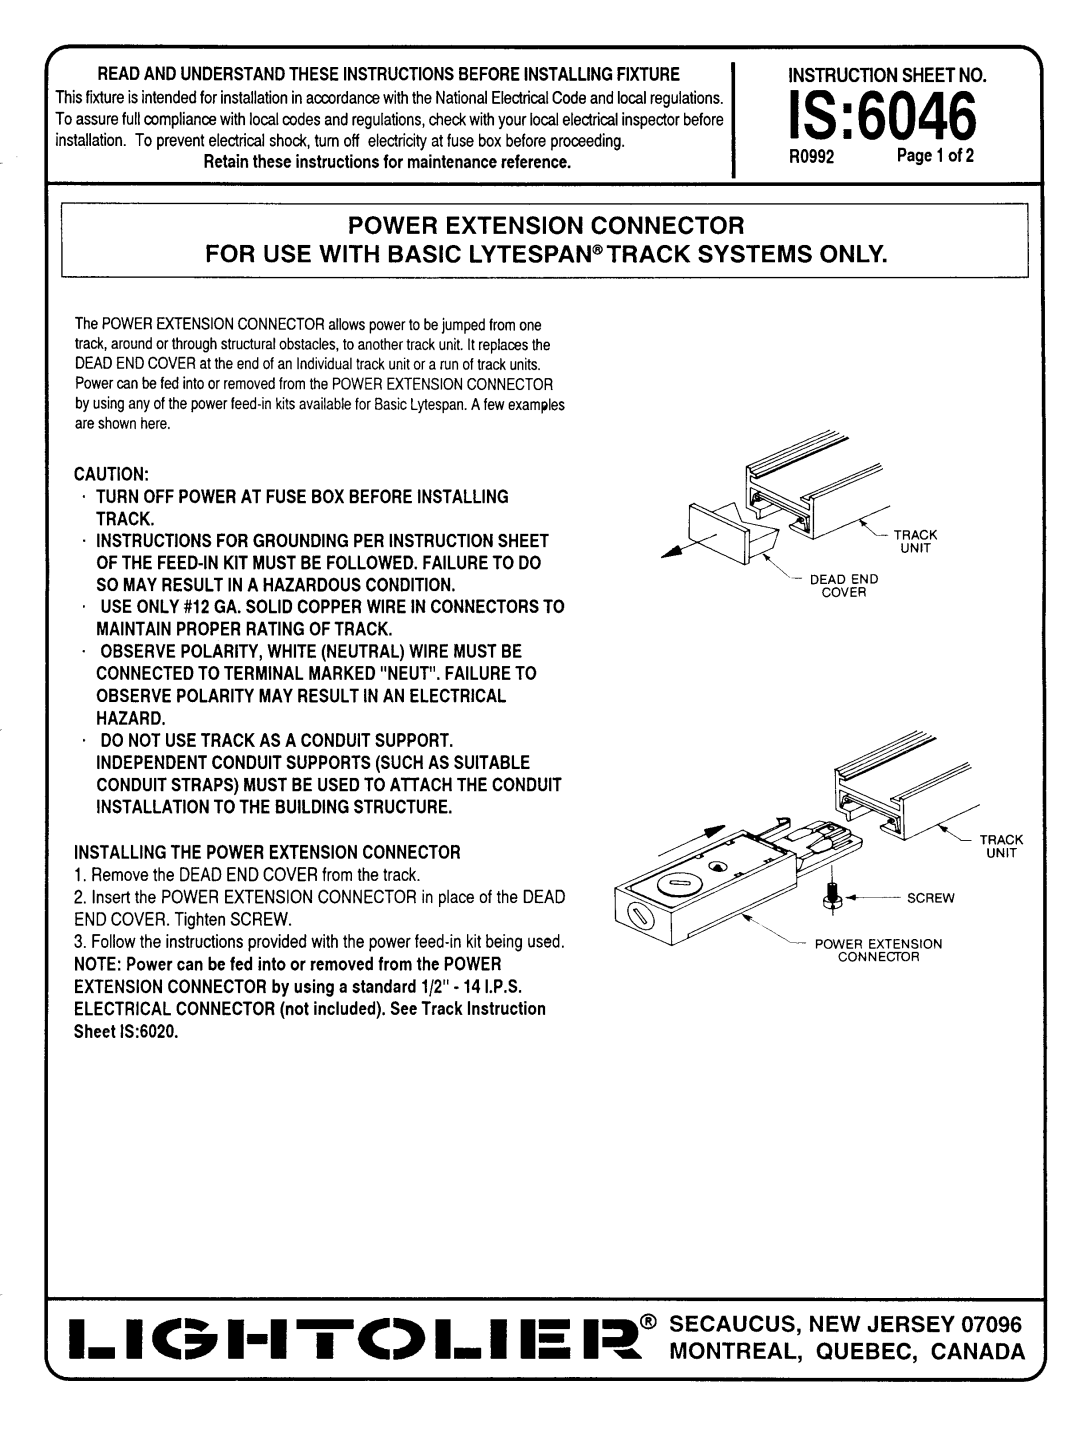 Lightolier 6046 instruction sheet Is, 1=1 iC L I E R“ EWAH?!!WEY%Y, Power Extension Connector 